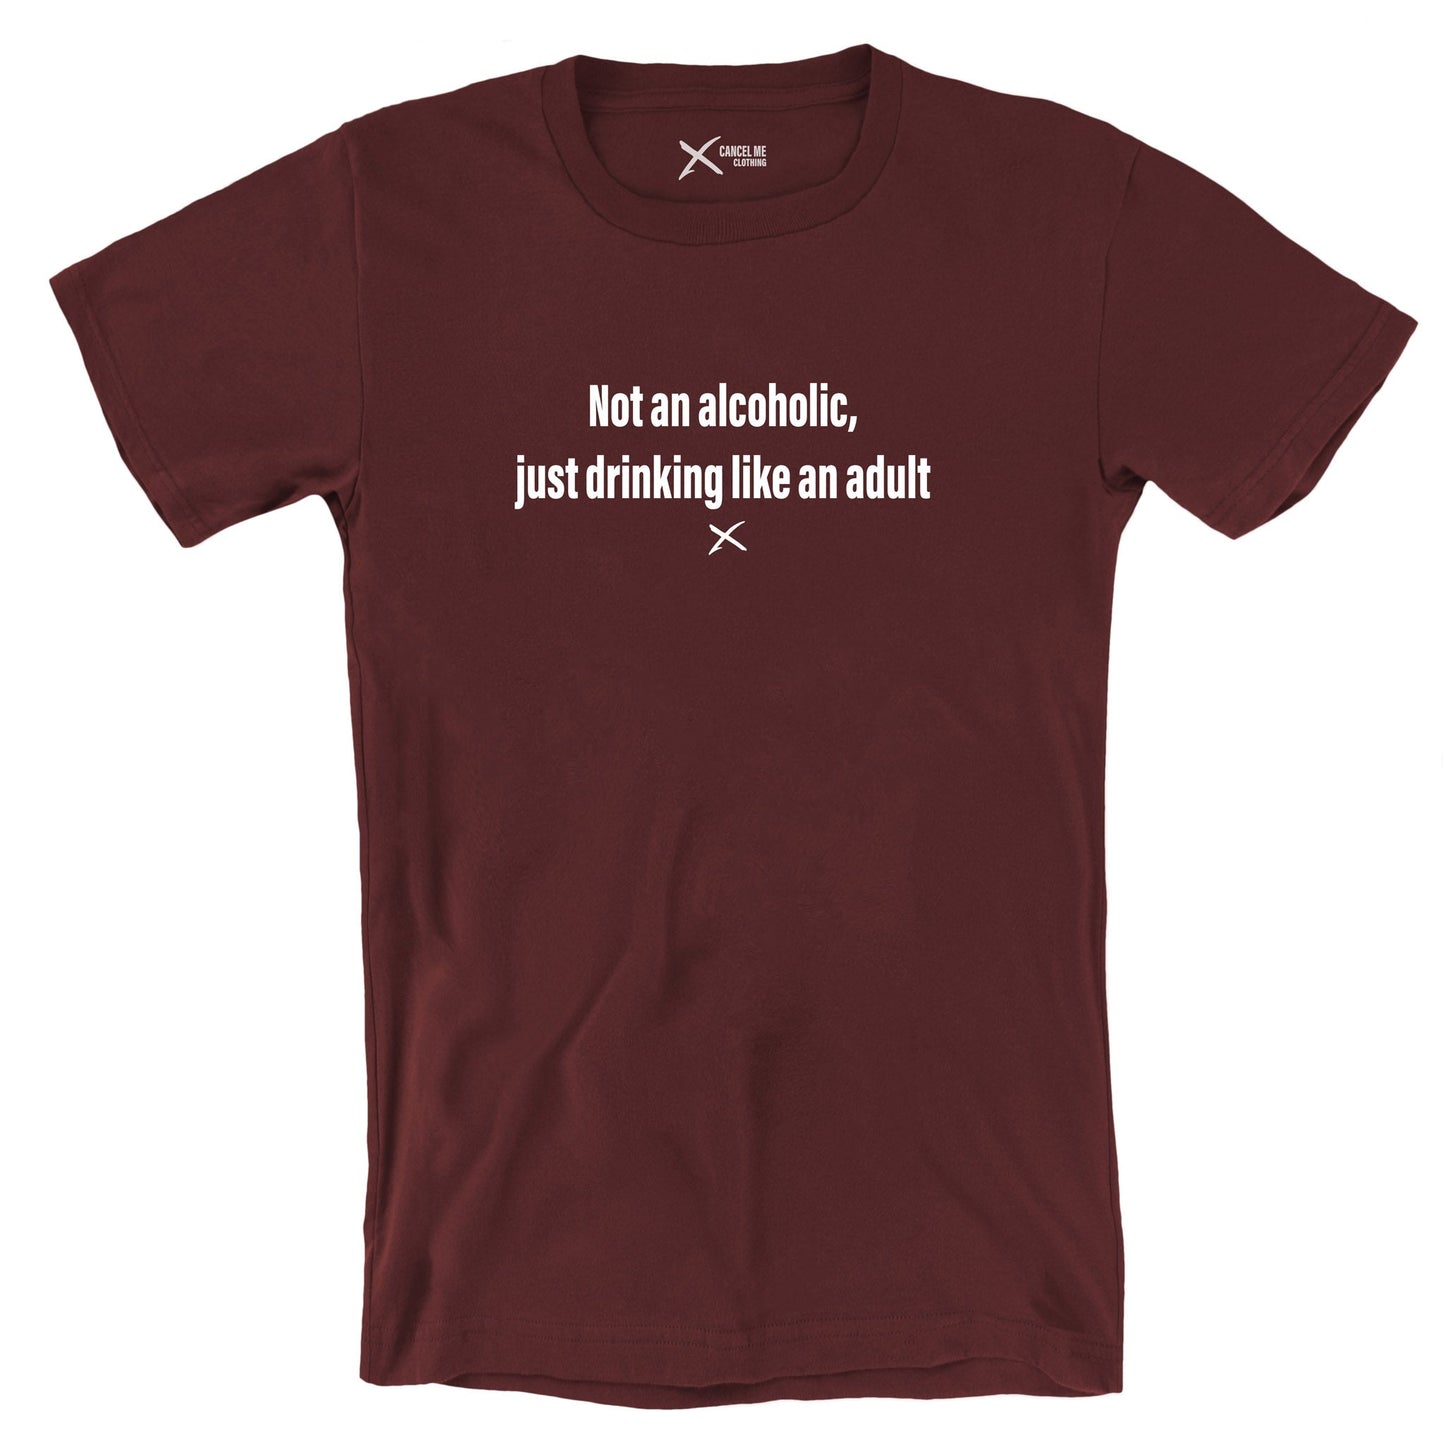 Not an alcoholic, just drinking like an adult - Shirt